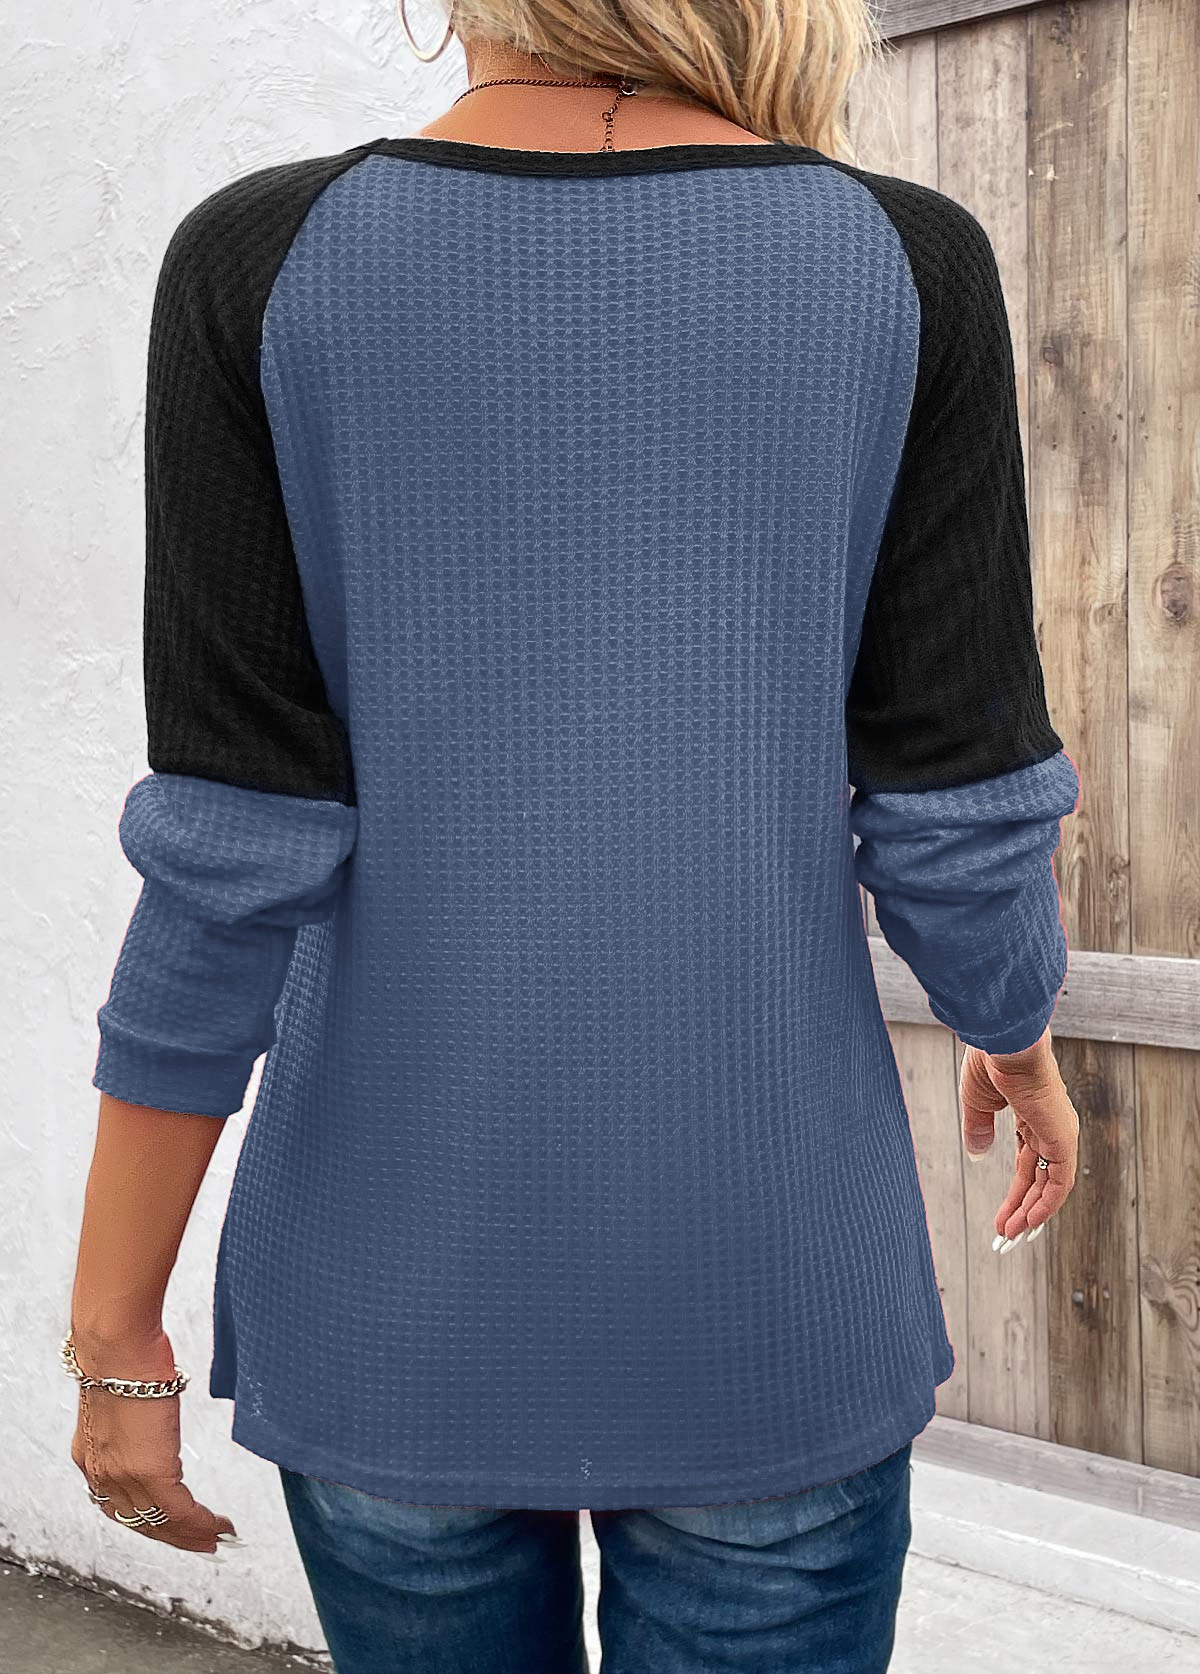 Patchwork Dusty Blue Round Neck Long Sleeve T Shirt